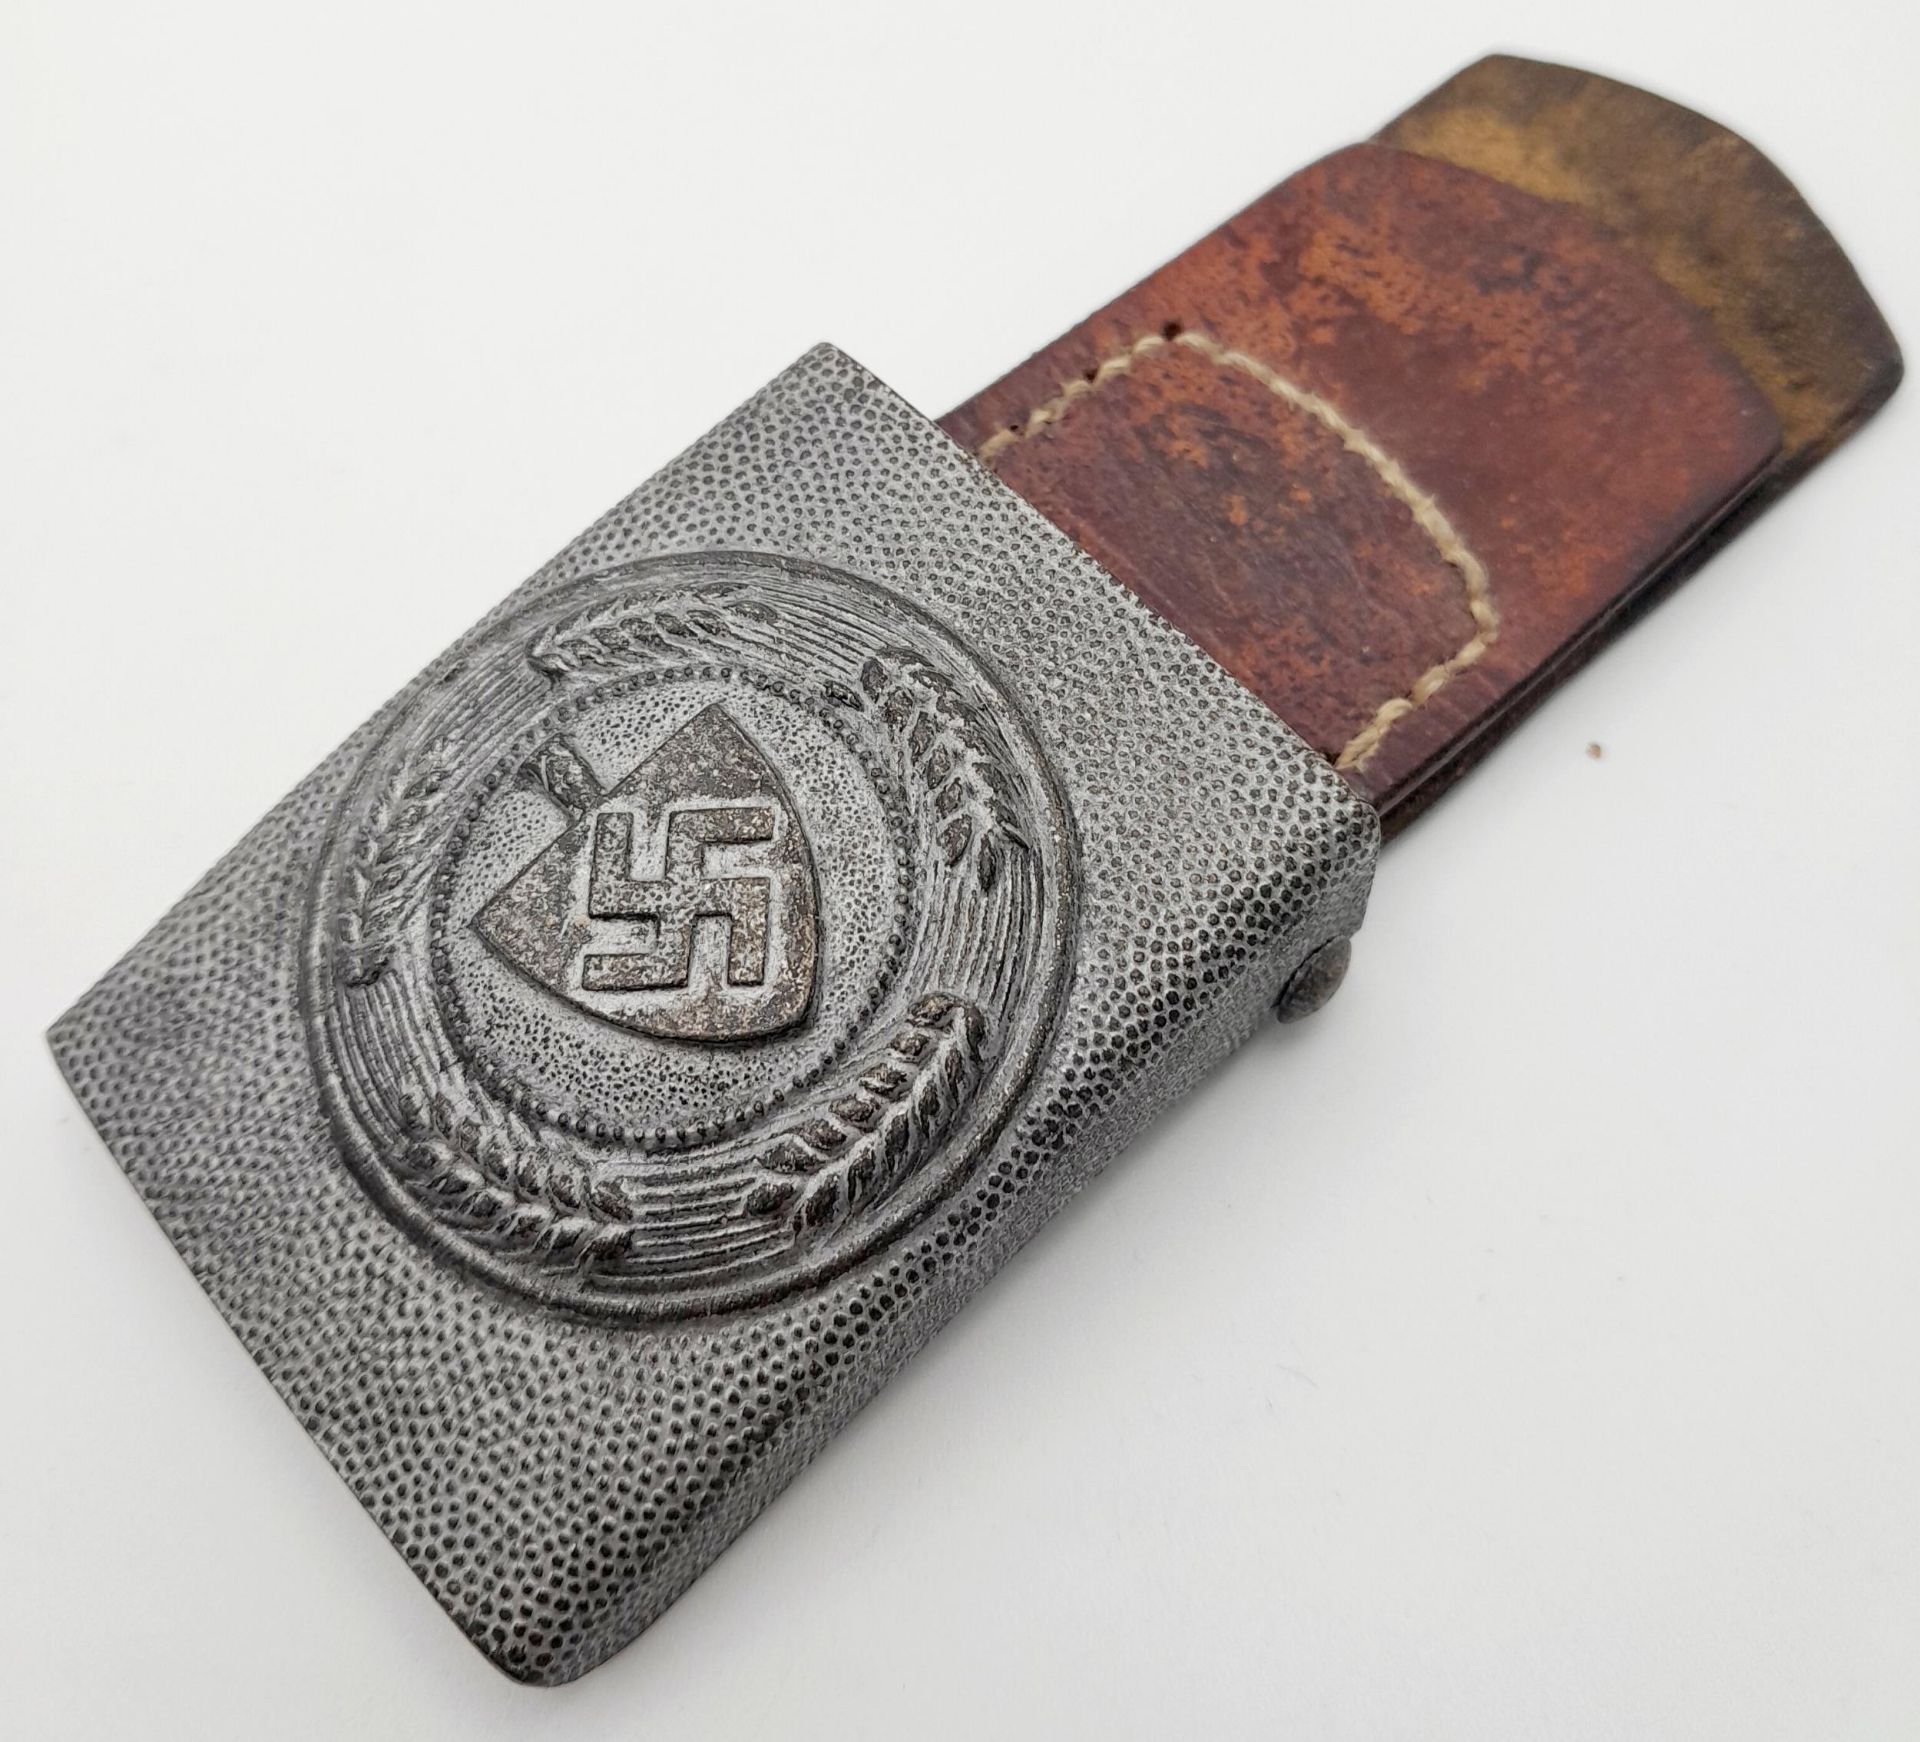 WW2 German RAD (Reichsarbeitdsdienst) – Labour Corps Enlisted Mans-Nco’s Aluminium Buckle and